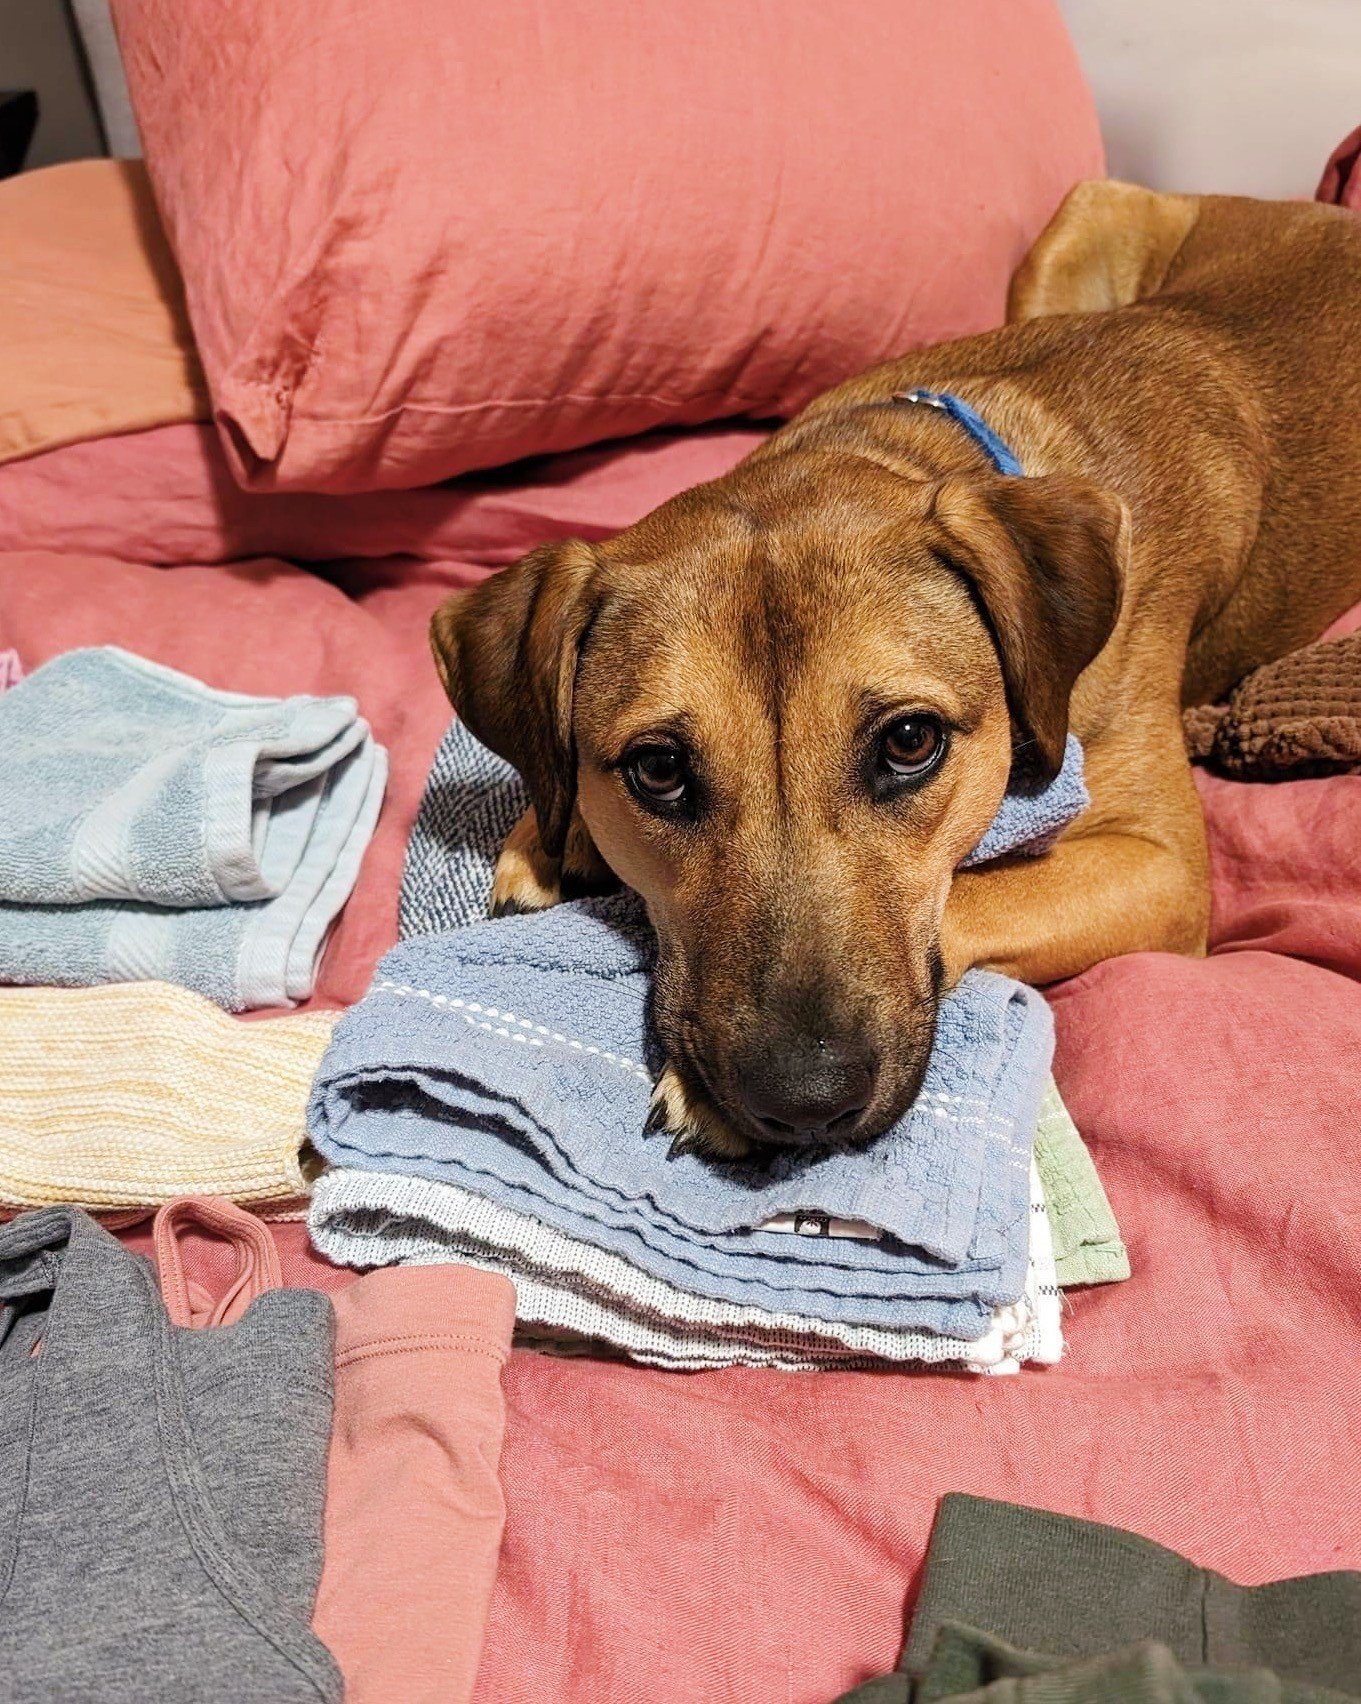 Norah&rsquo;s a great housemate &mdash; she&rsquo;ll even help with the laundry (just after this quick nap).